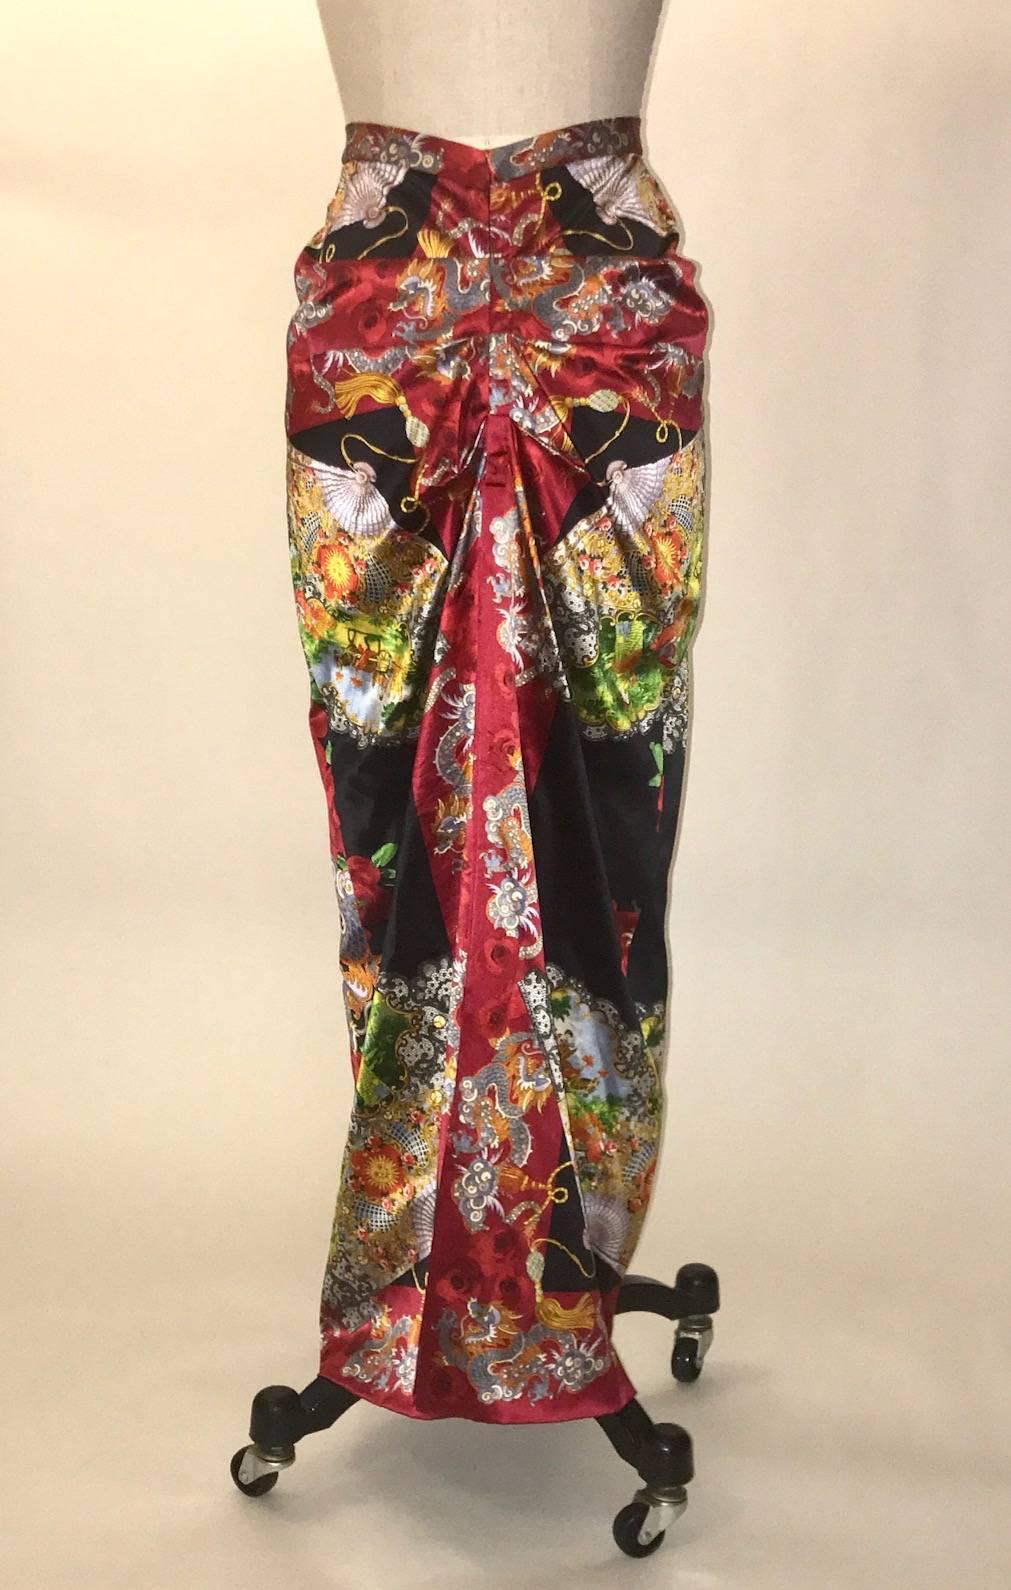 Dolce and Gabbana silk blend skirt features an Asian inspired print featuring dragons, roses and fans depicting countryside scenes. Amazing ruched detailing at back. Closes at back with ten hook and eyes and a snap. Eight inch slit at back center